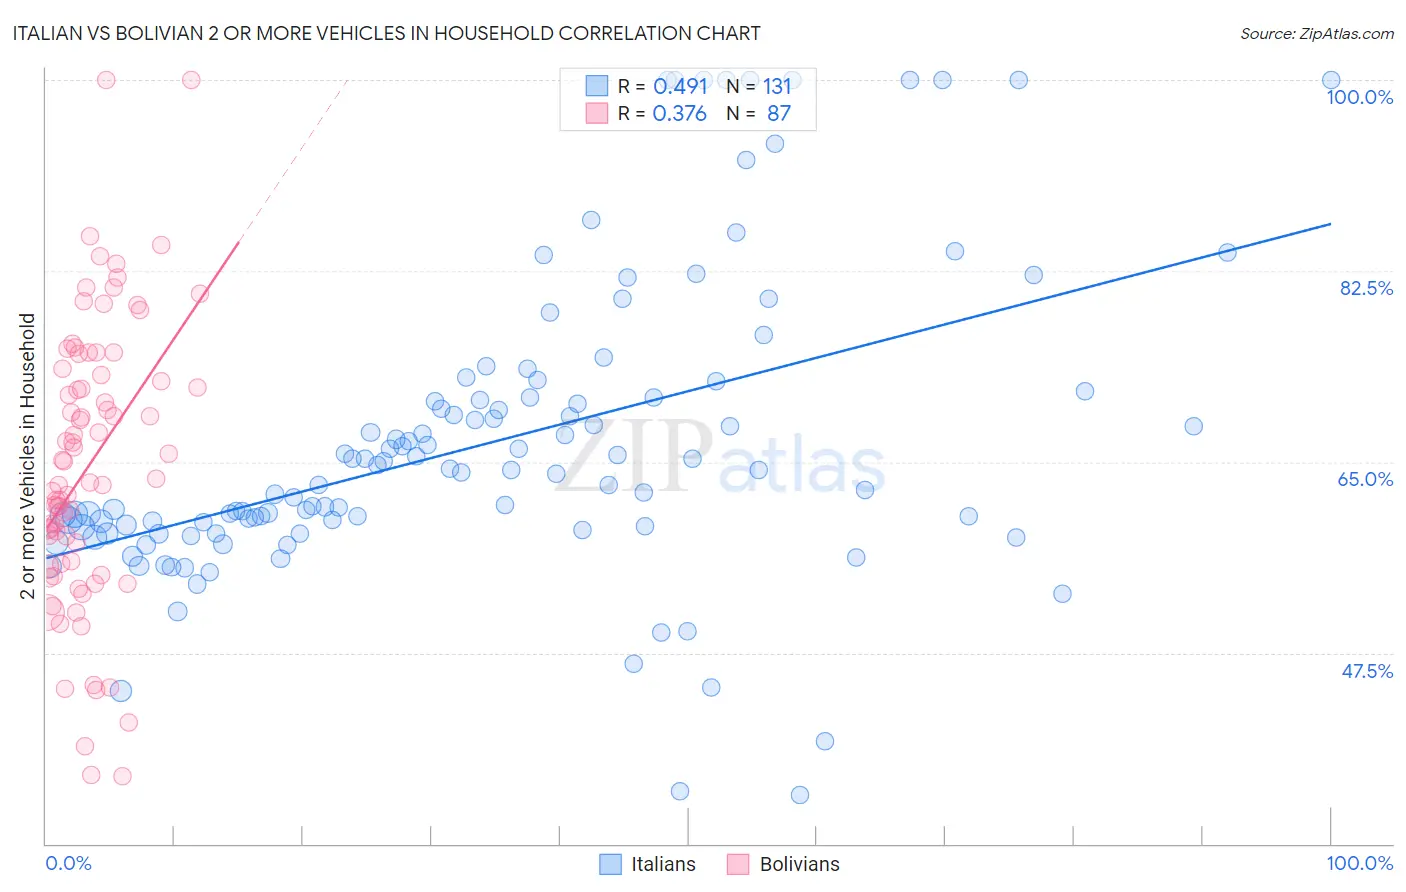 Italian vs Bolivian 2 or more Vehicles in Household